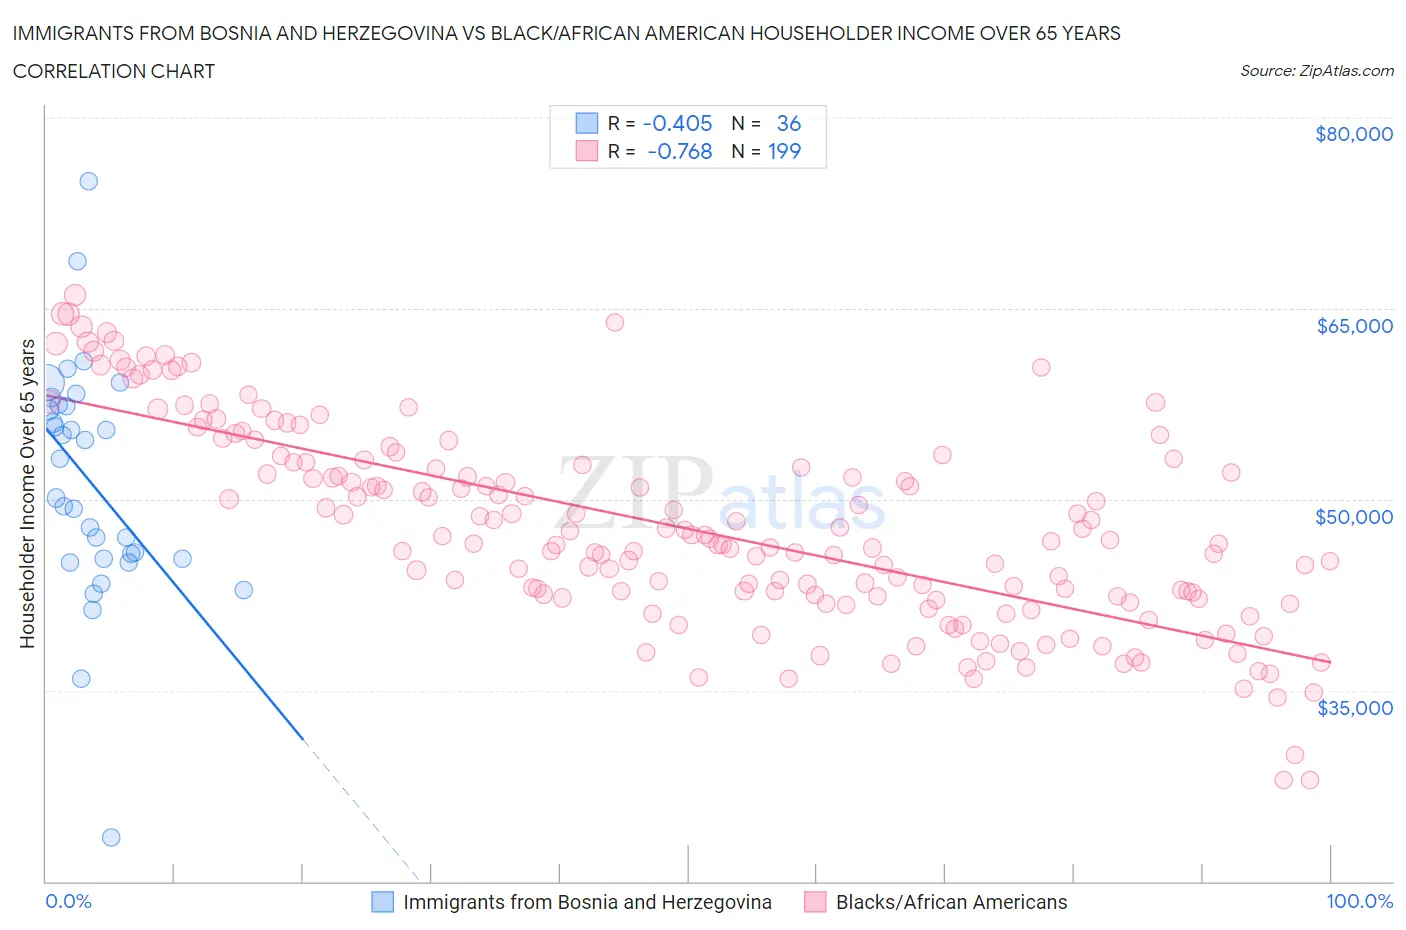 Immigrants from Bosnia and Herzegovina vs Black/African American Householder Income Over 65 years